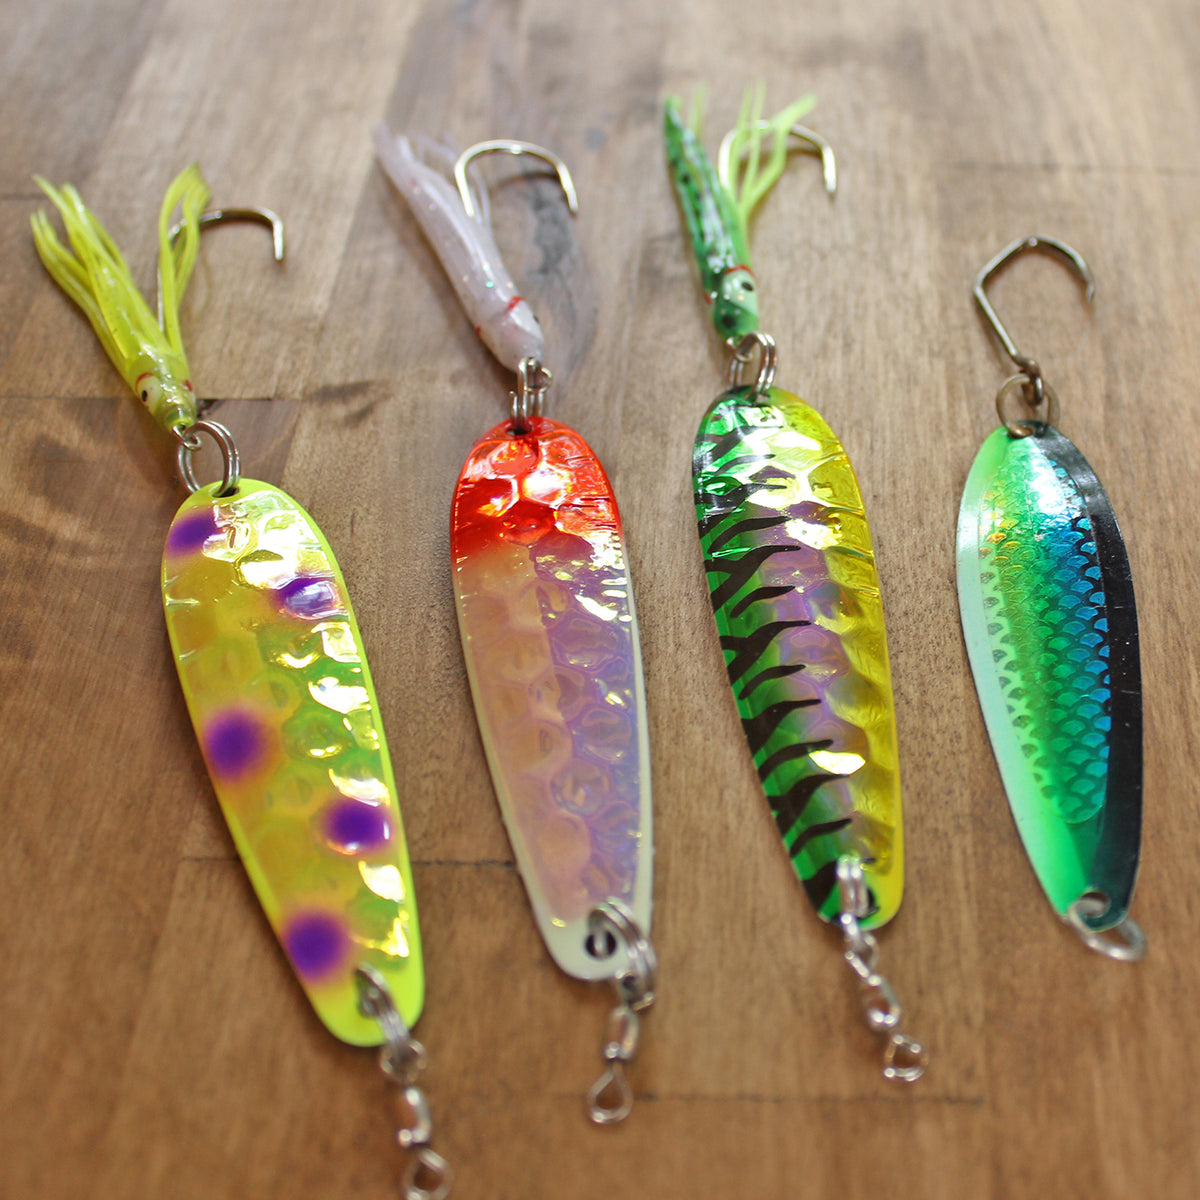 Doctor Spoons Orginal Fishing Lures Series - Made in USA - Saltwater &  Freshwater - Eagle Claw Hook - Walleye, Bass, Northern, Pike, Salmon,  Trout, Striper & More - Casting, Jigging, Trolling 3 Pack - Yahoo Shopping